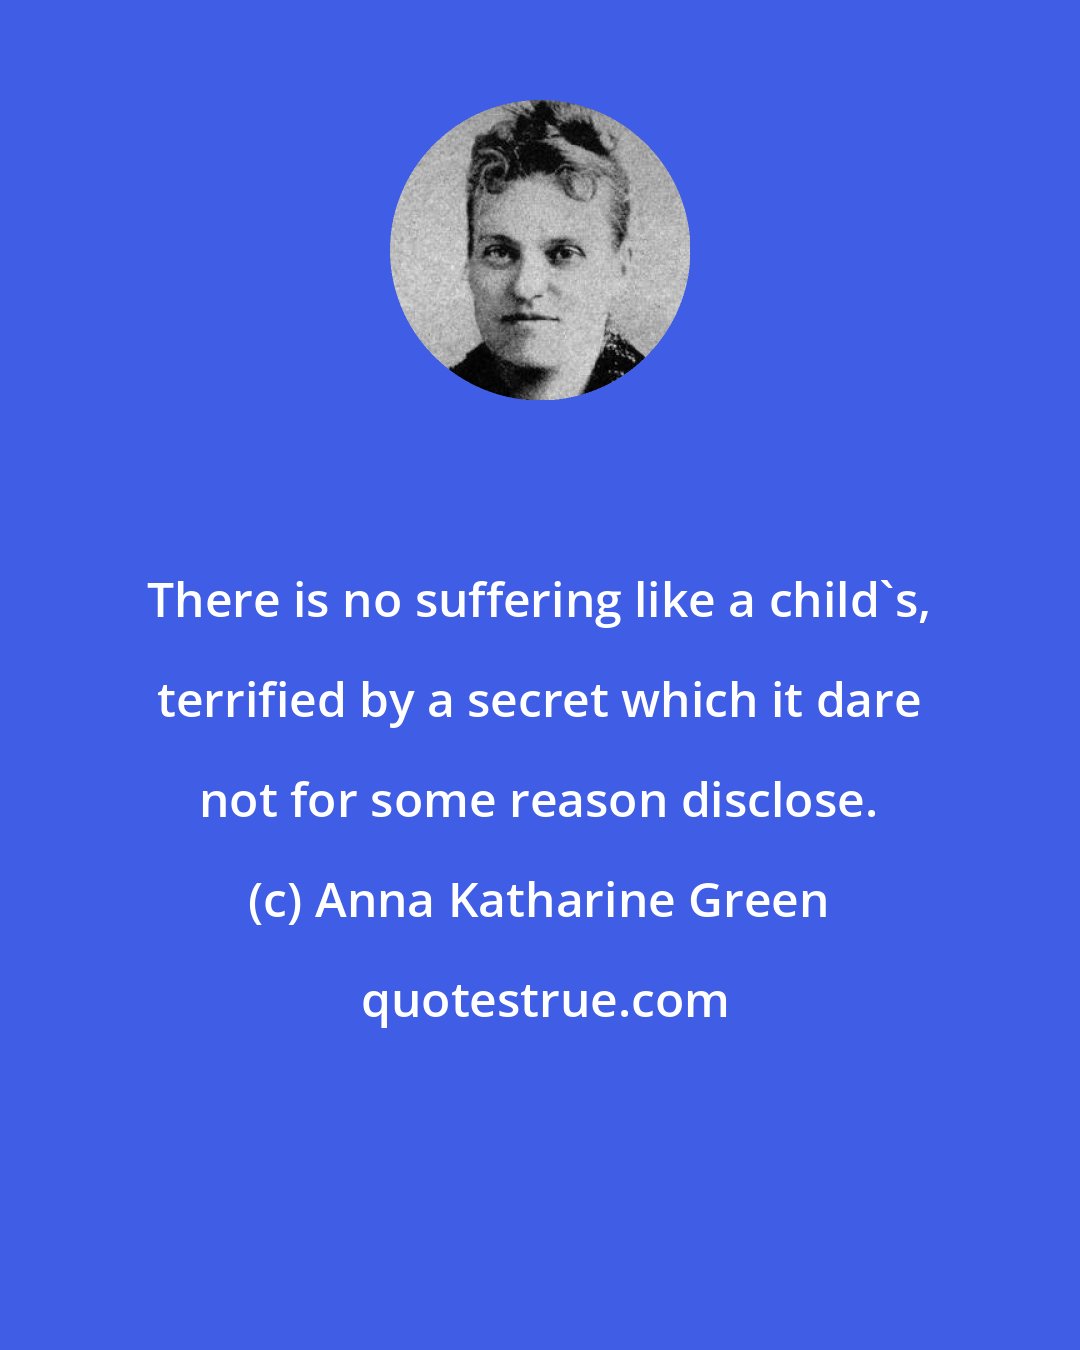 Anna Katharine Green: There is no suffering like a child's, terrified by a secret which it dare not for some reason disclose.